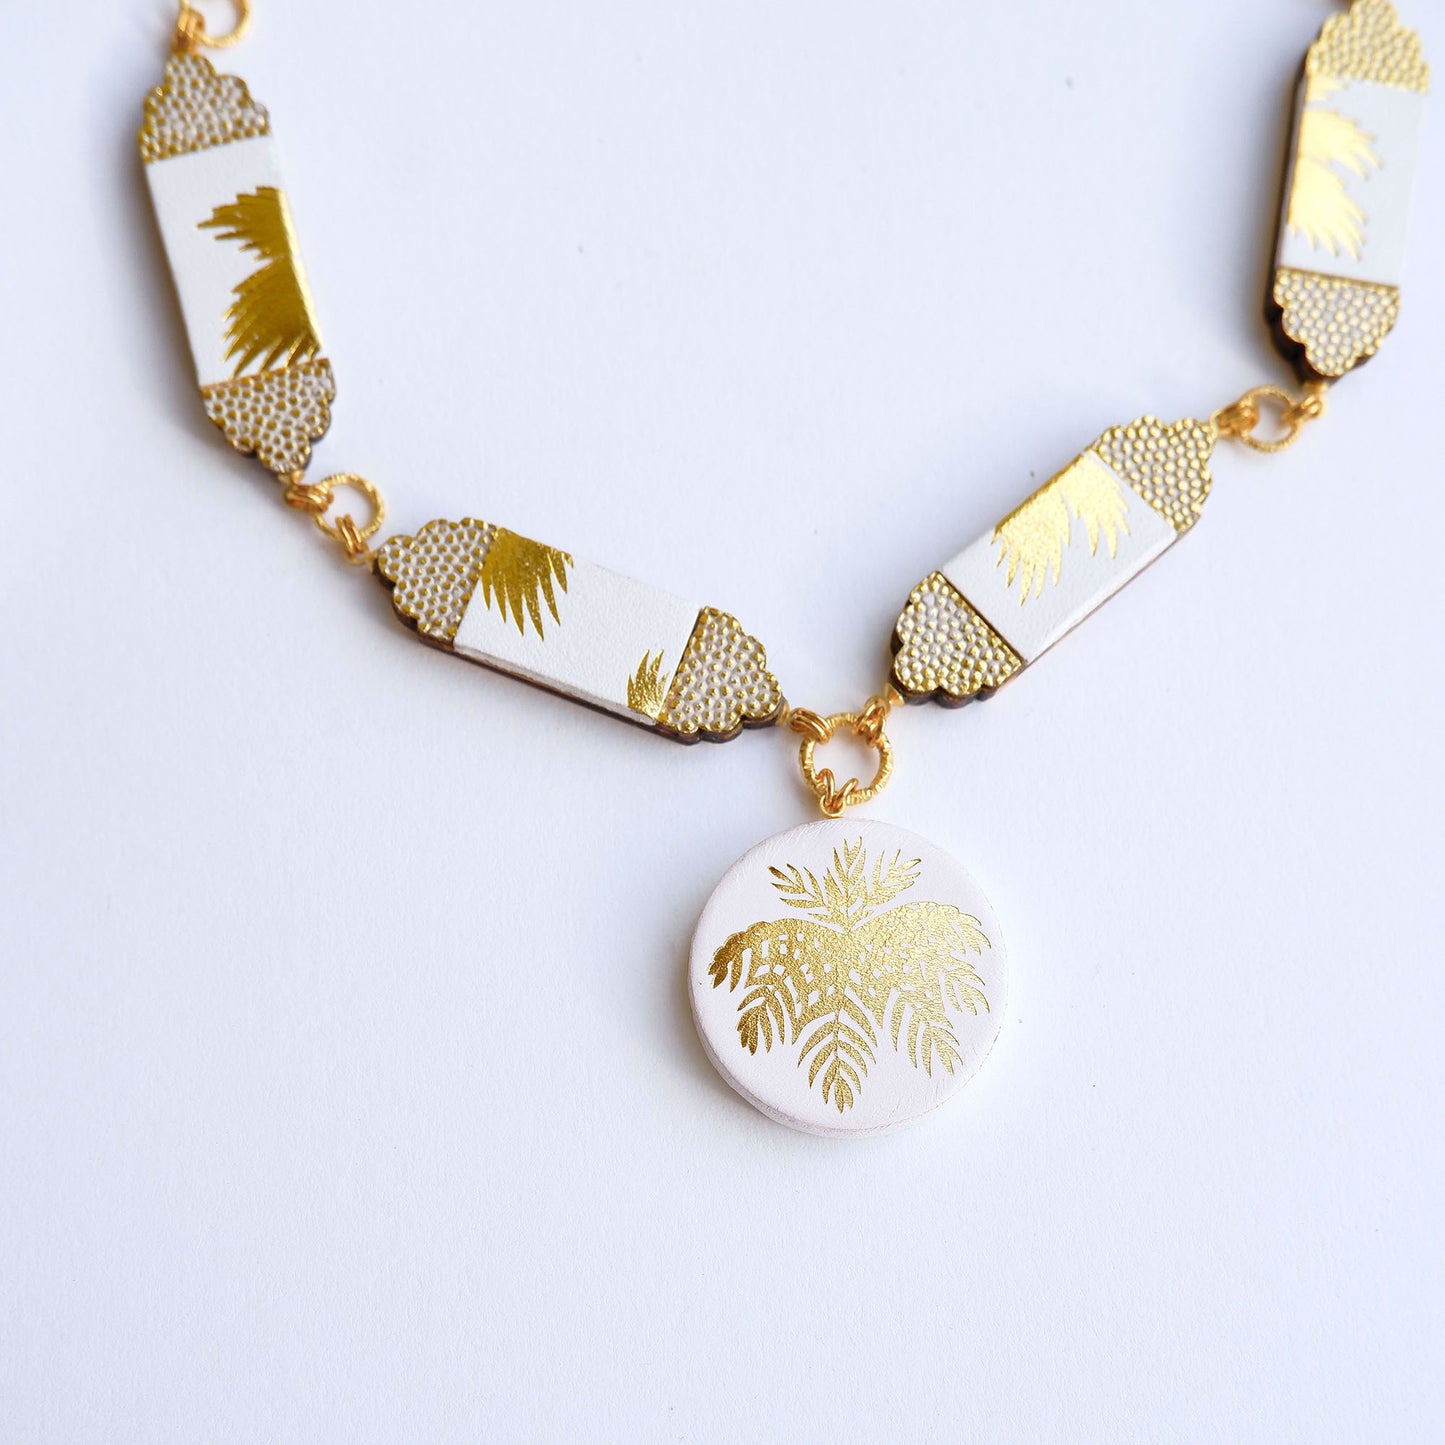 white leather necklace, with six sections & medallion pendant.. Gold Palm print on white leather, with embossed dot pattern detail., close up